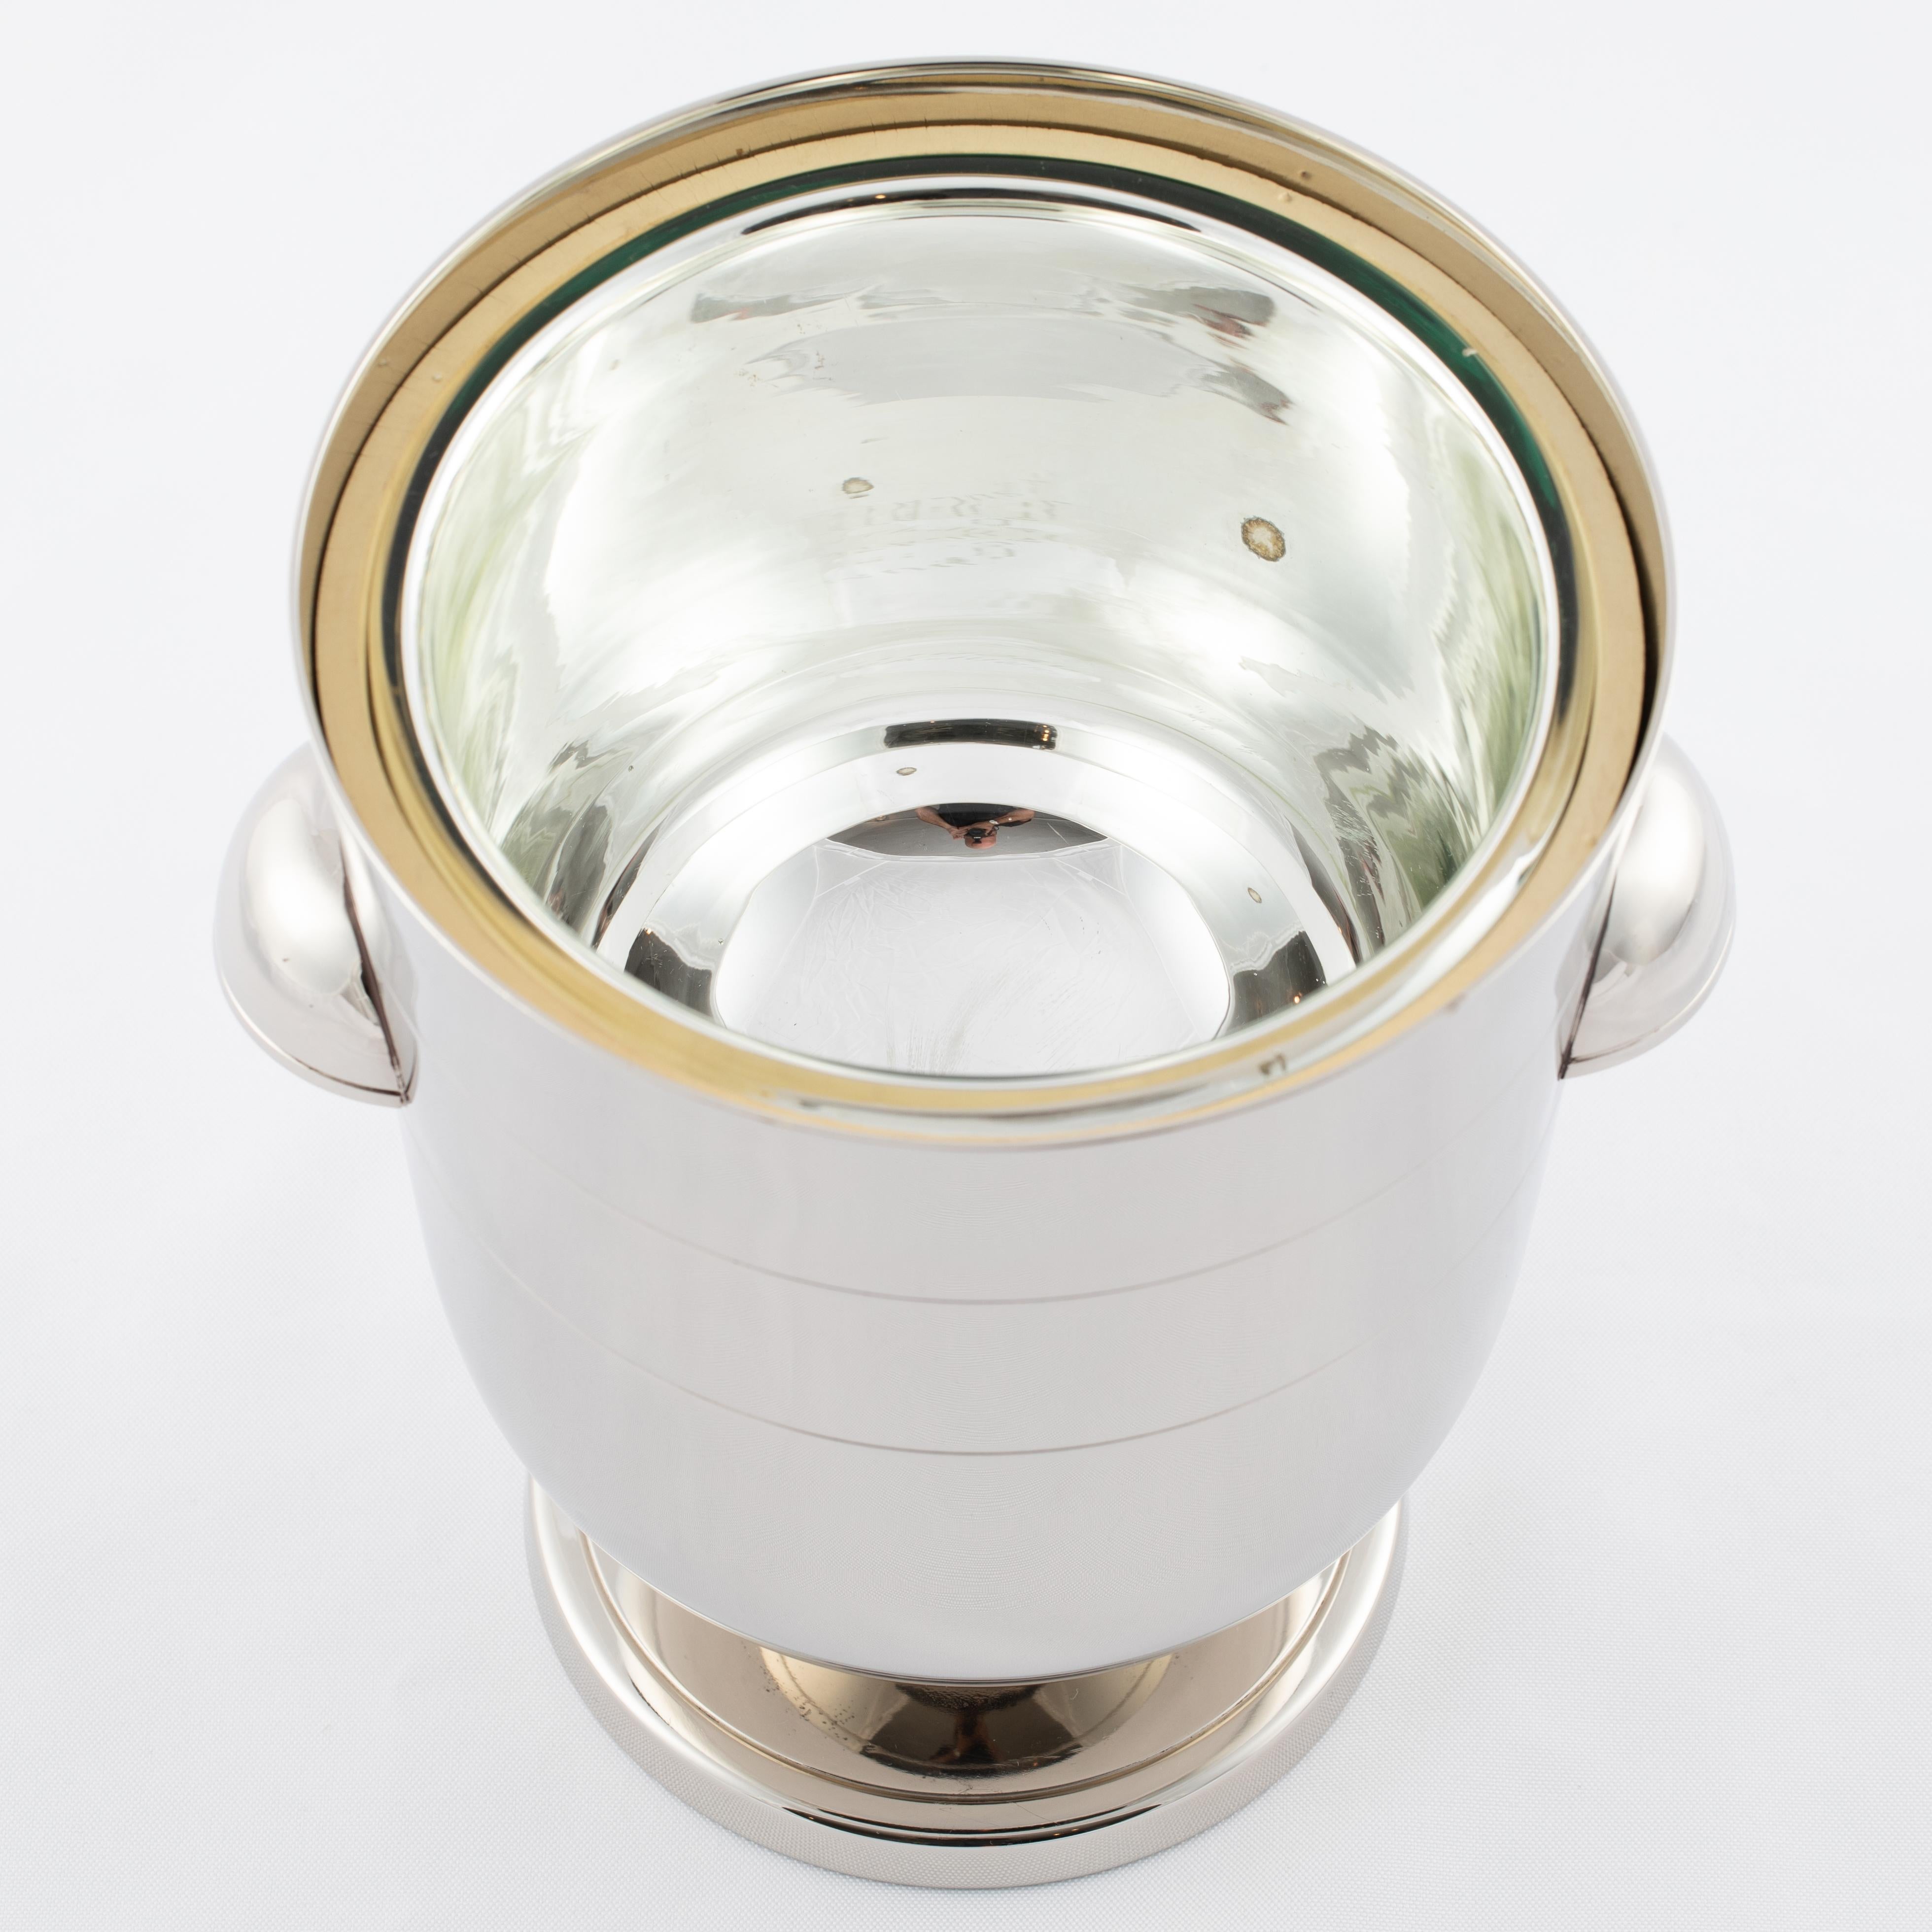 Brass Tommi Parzinger Polished-Nickel Ice Bucket, circa 1950s For Sale